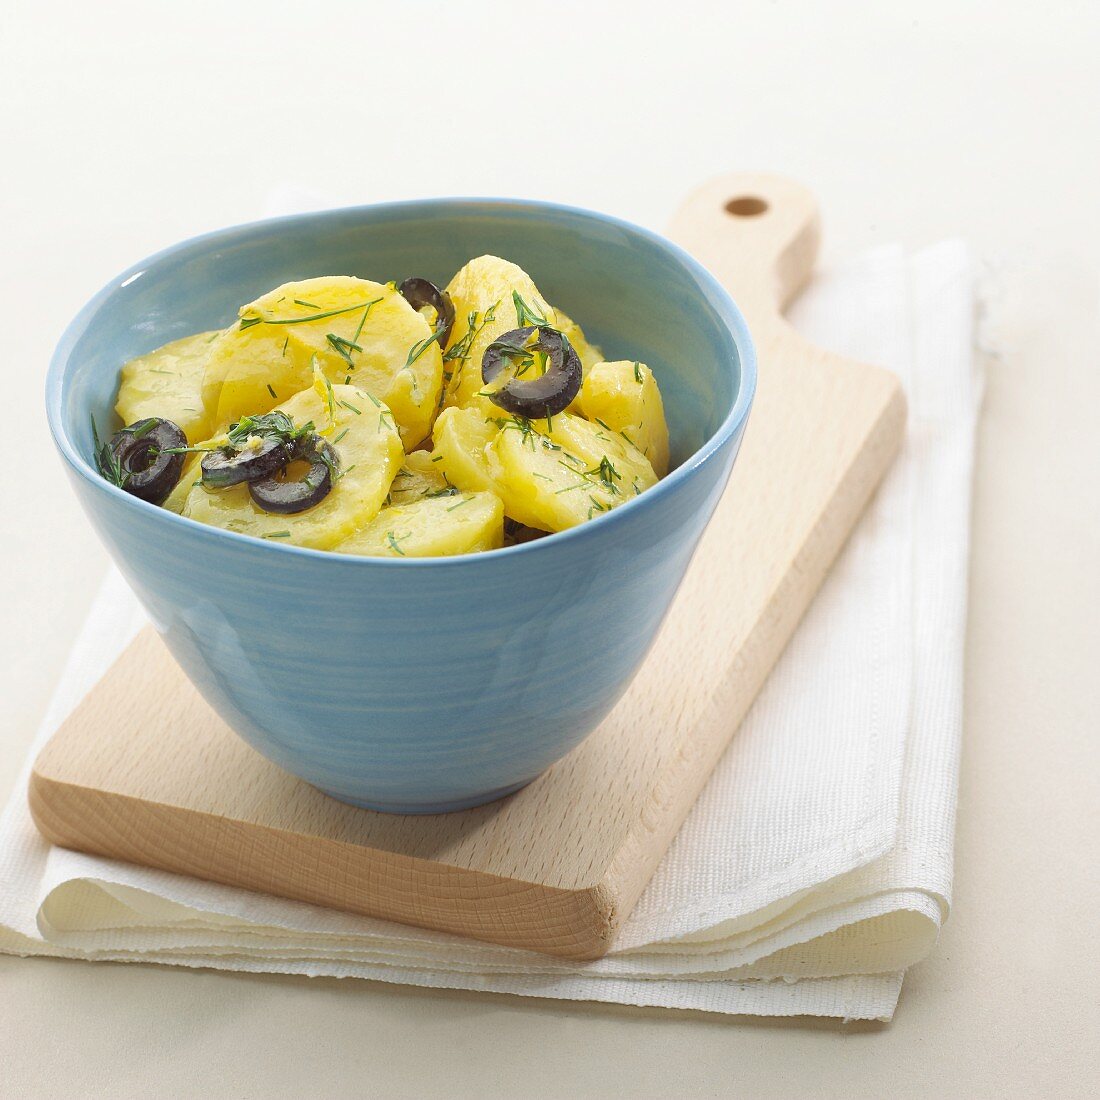 Potato salad with olives and dill